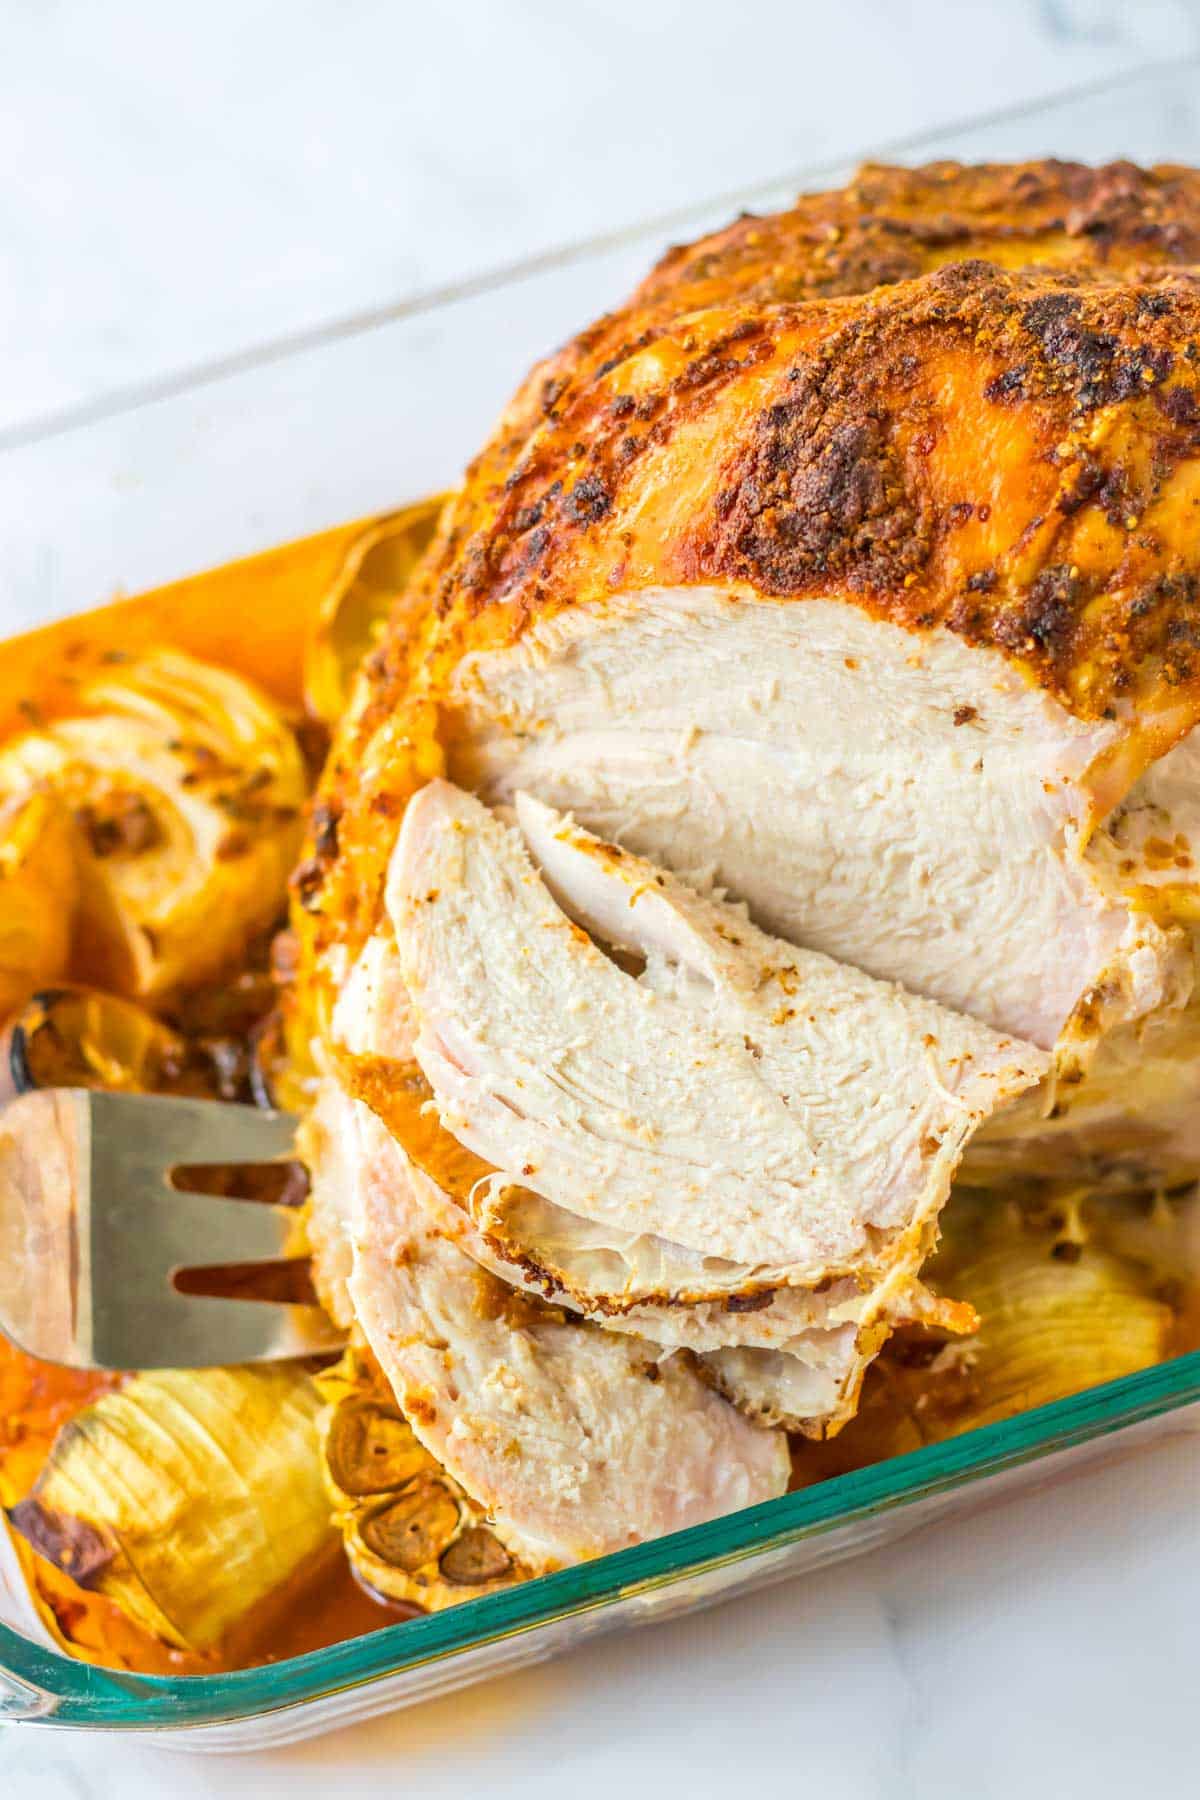 A roasted turkey with artichokes in a glass baking dish.